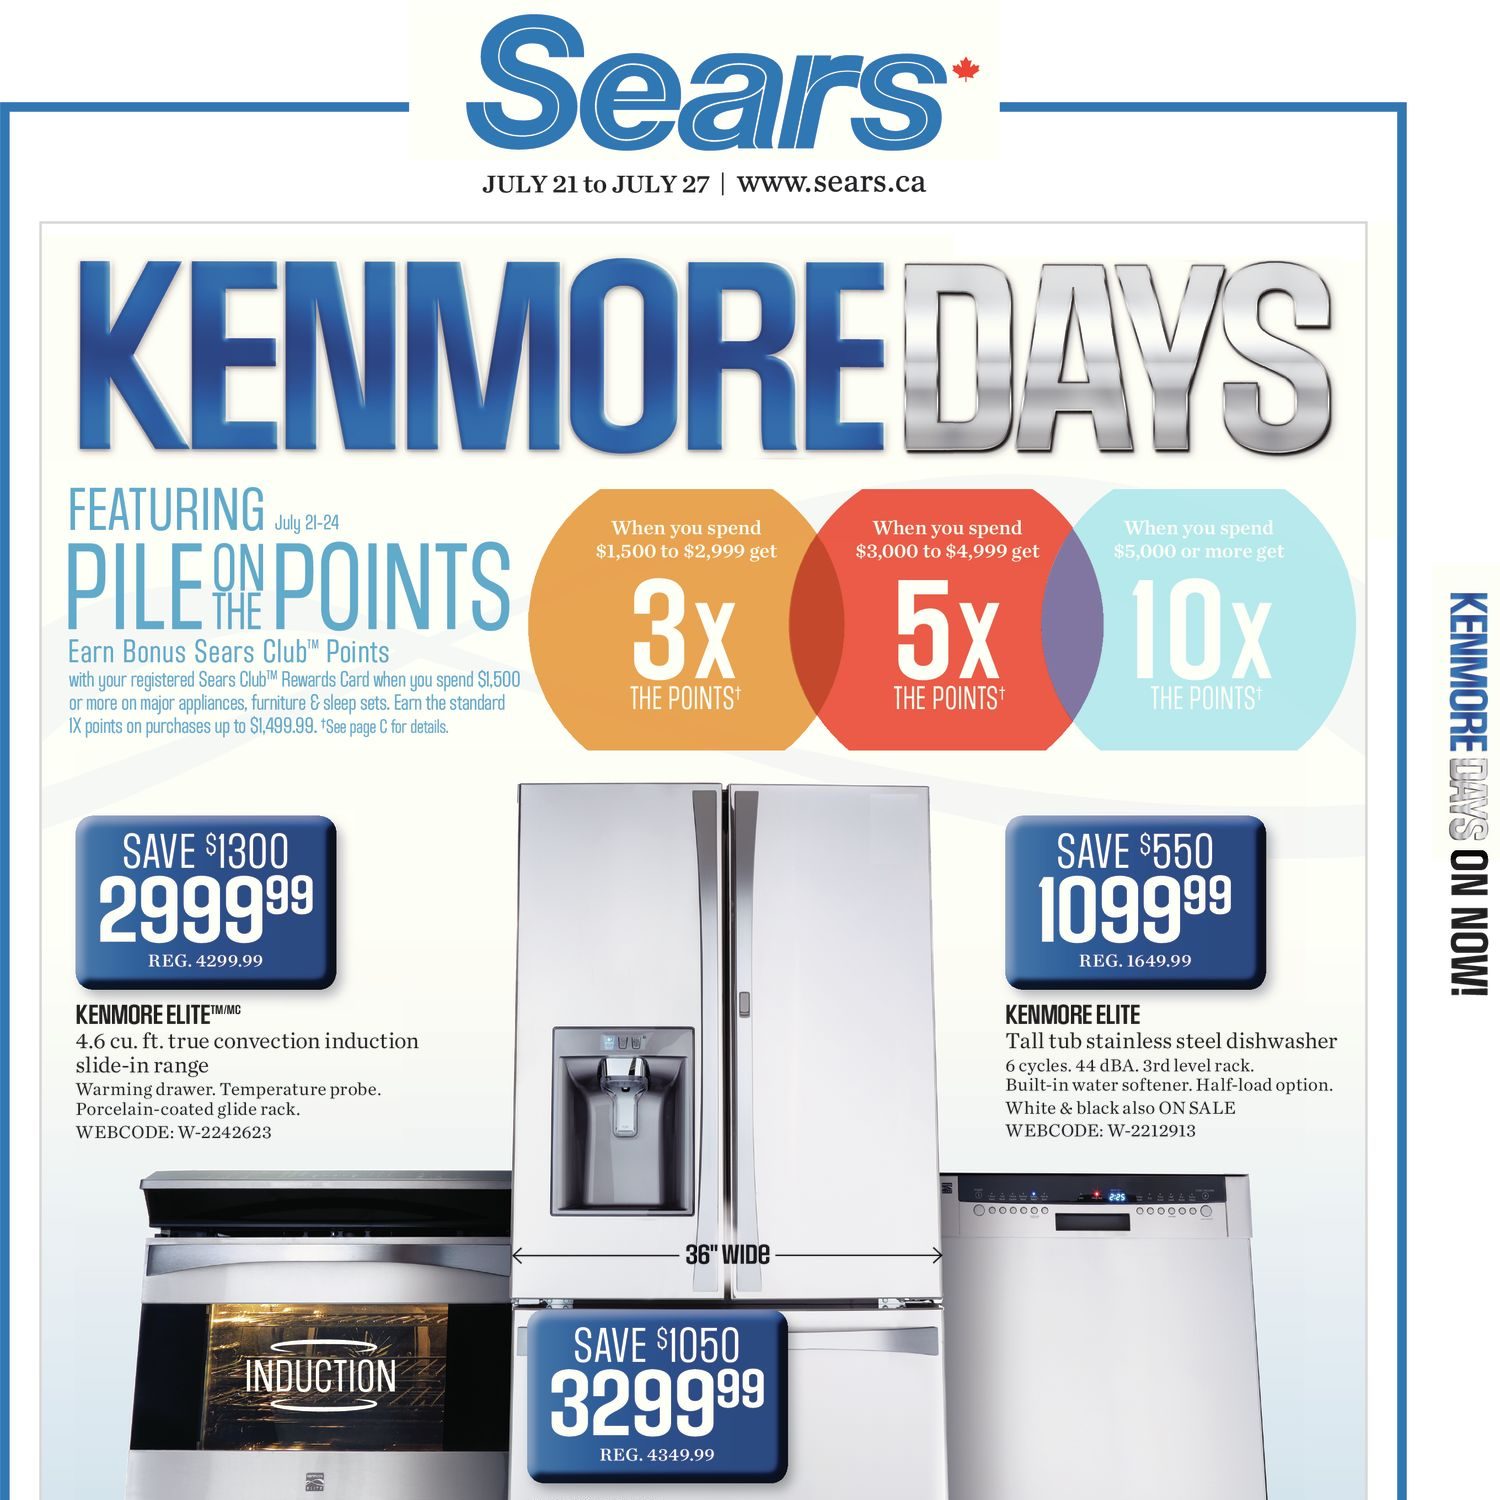 Sears Weekly Flyer Kenmore Days on Now! Jul 21 27